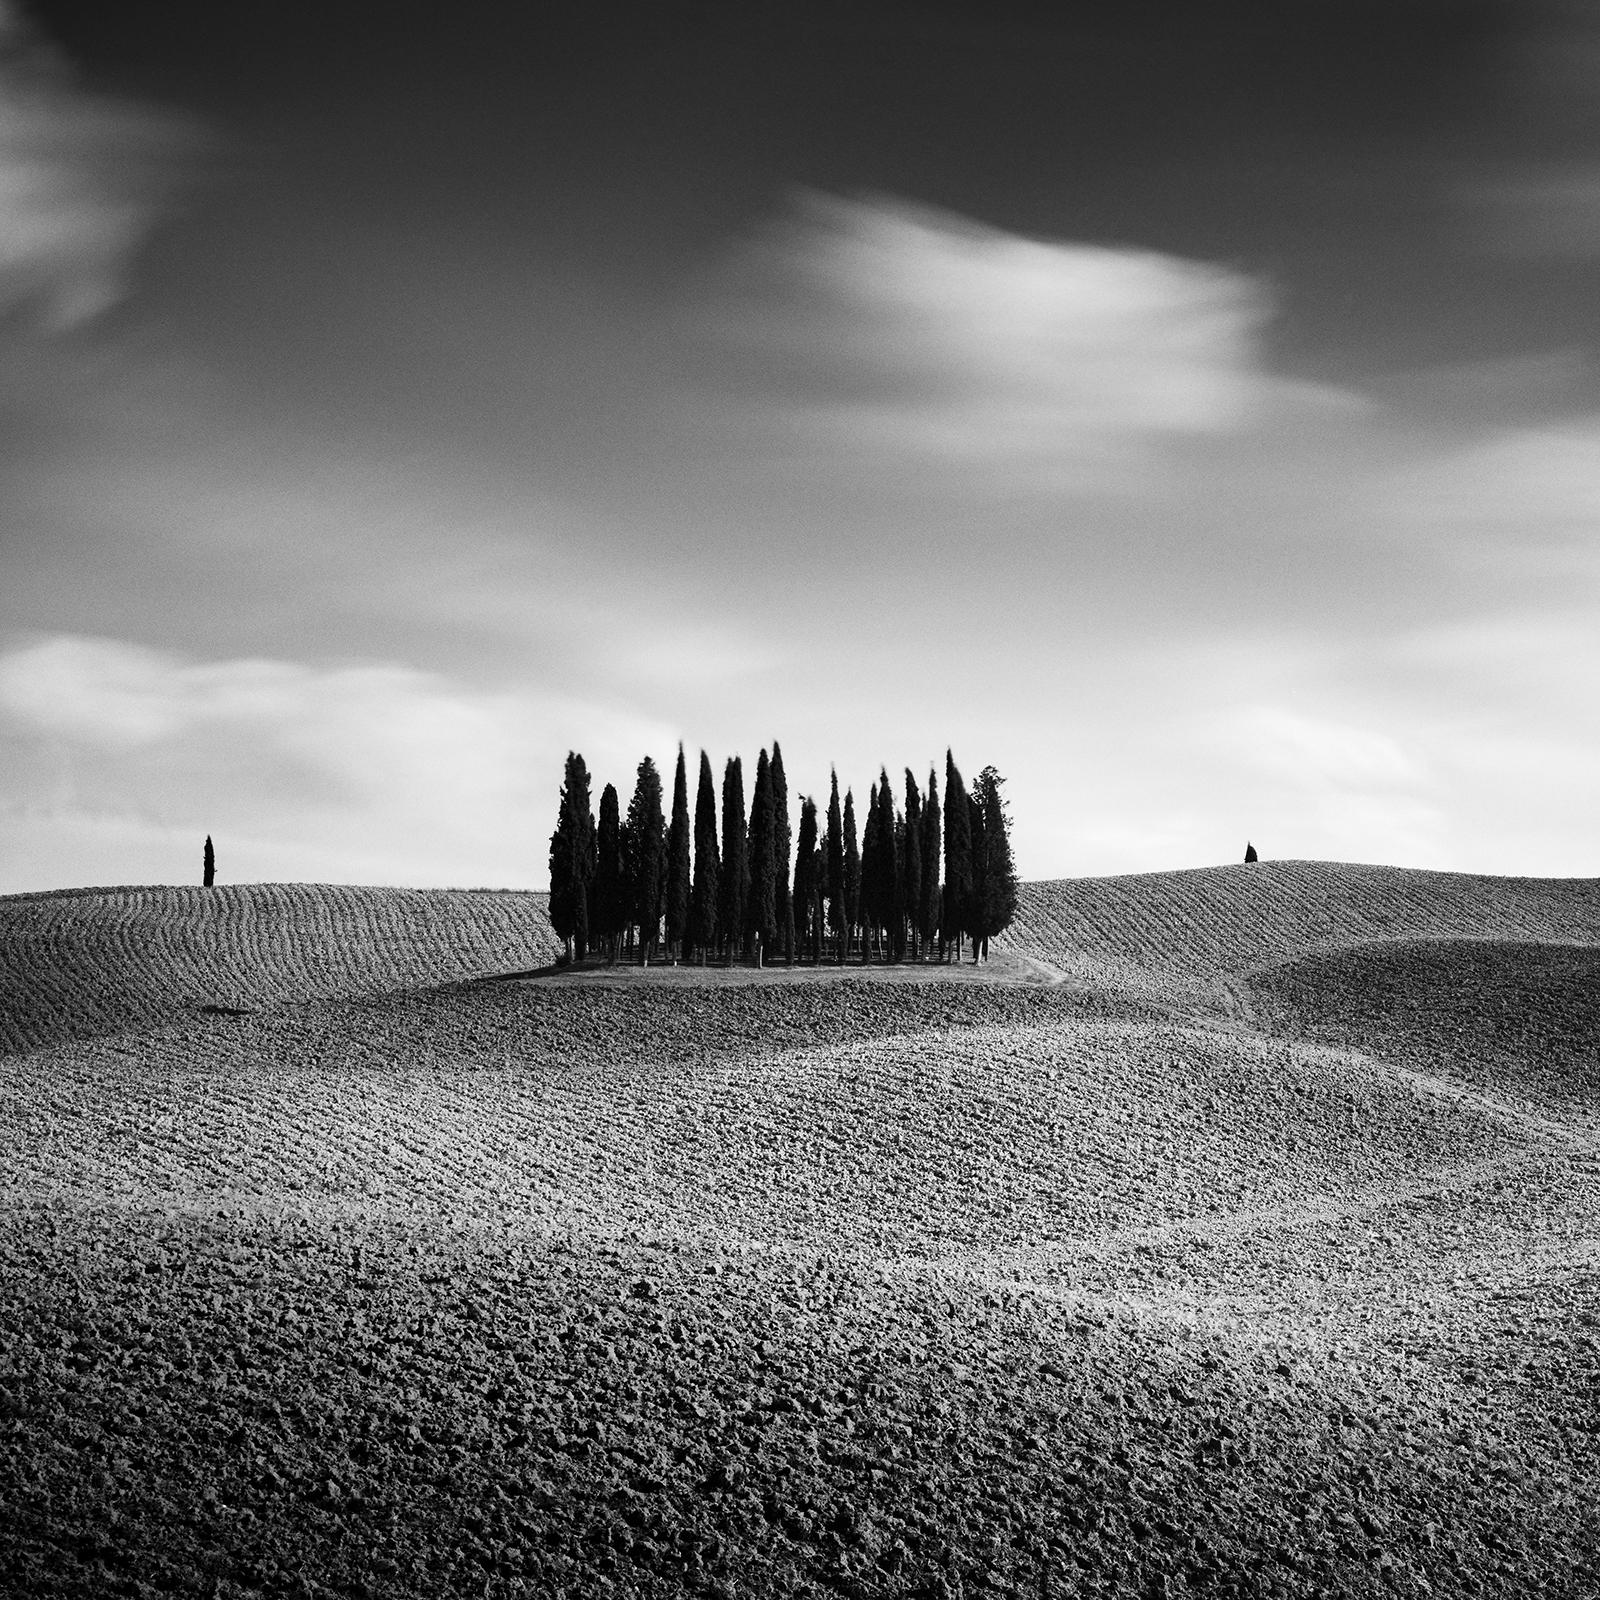 Black and white fine art long exposure panorama - landscape photography. Archival pigment ink print as part of a limited edition of 7. All Gerald Berghammer prints are made to order in limited editions on Hahnemuehle Photo Rag Baryta. Each print is